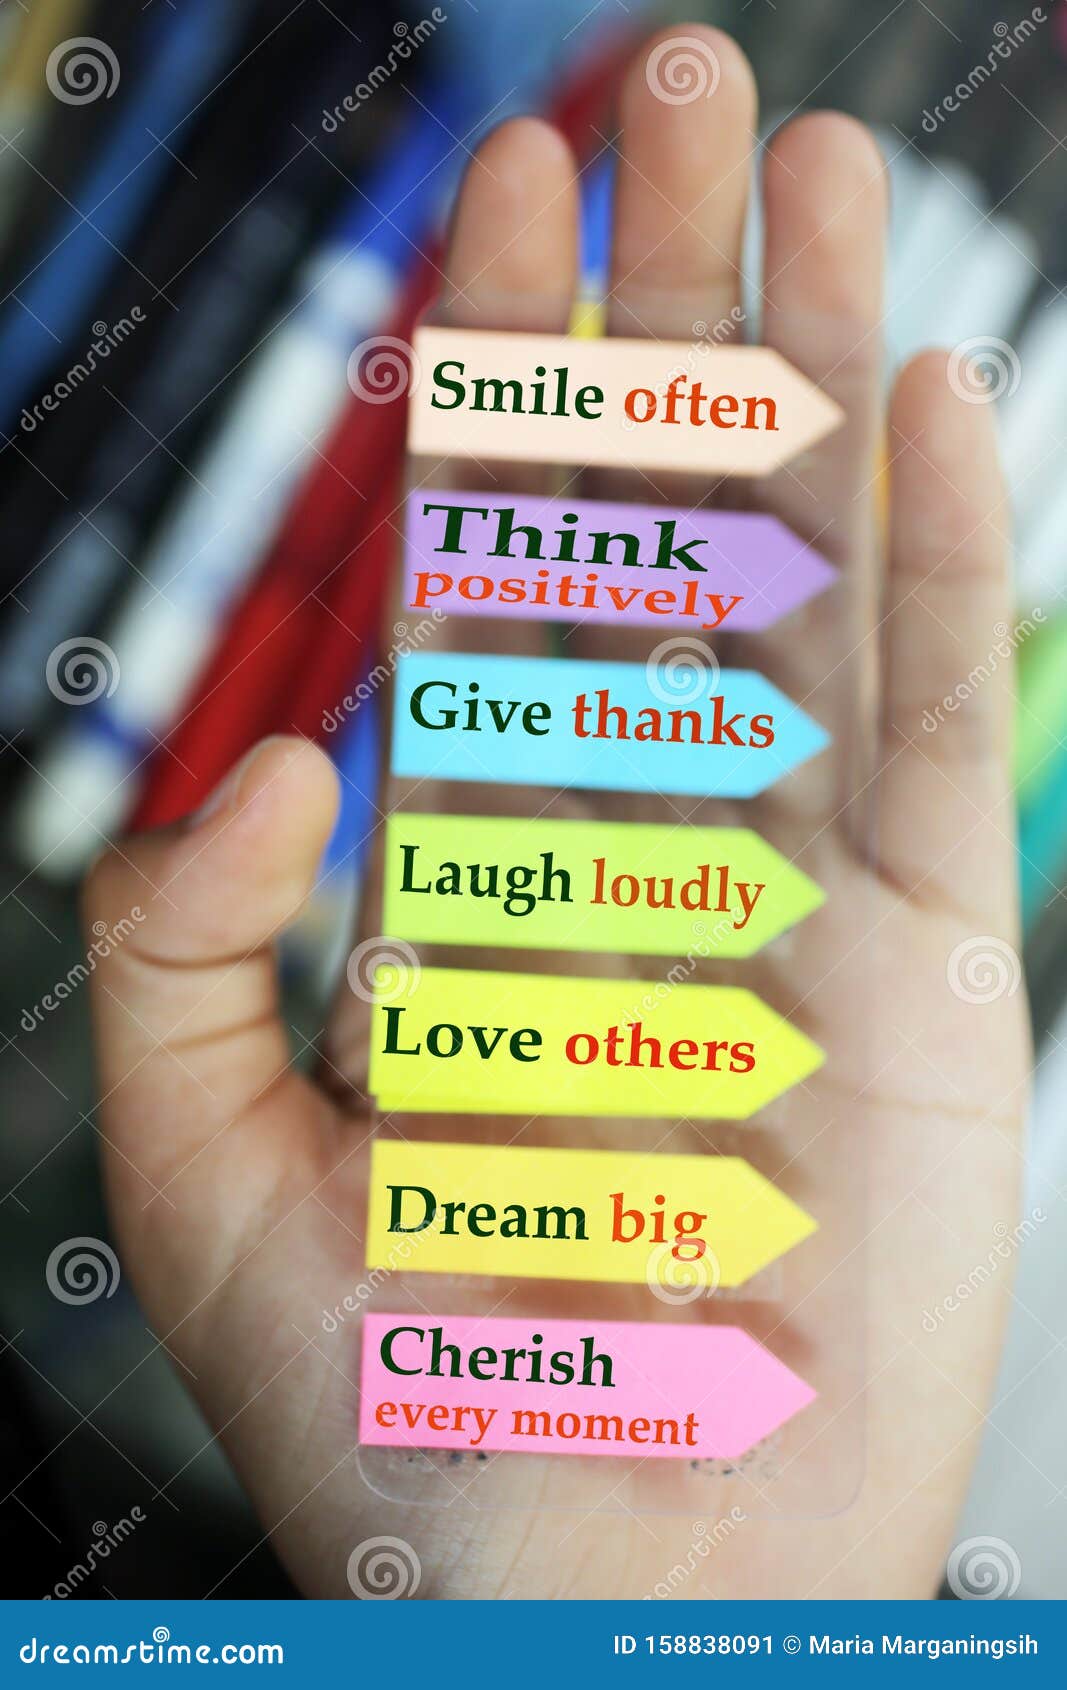 positive words in hand. todays goals list. morning inspirational words - smile often. think positively. give thanks. laugh loudly